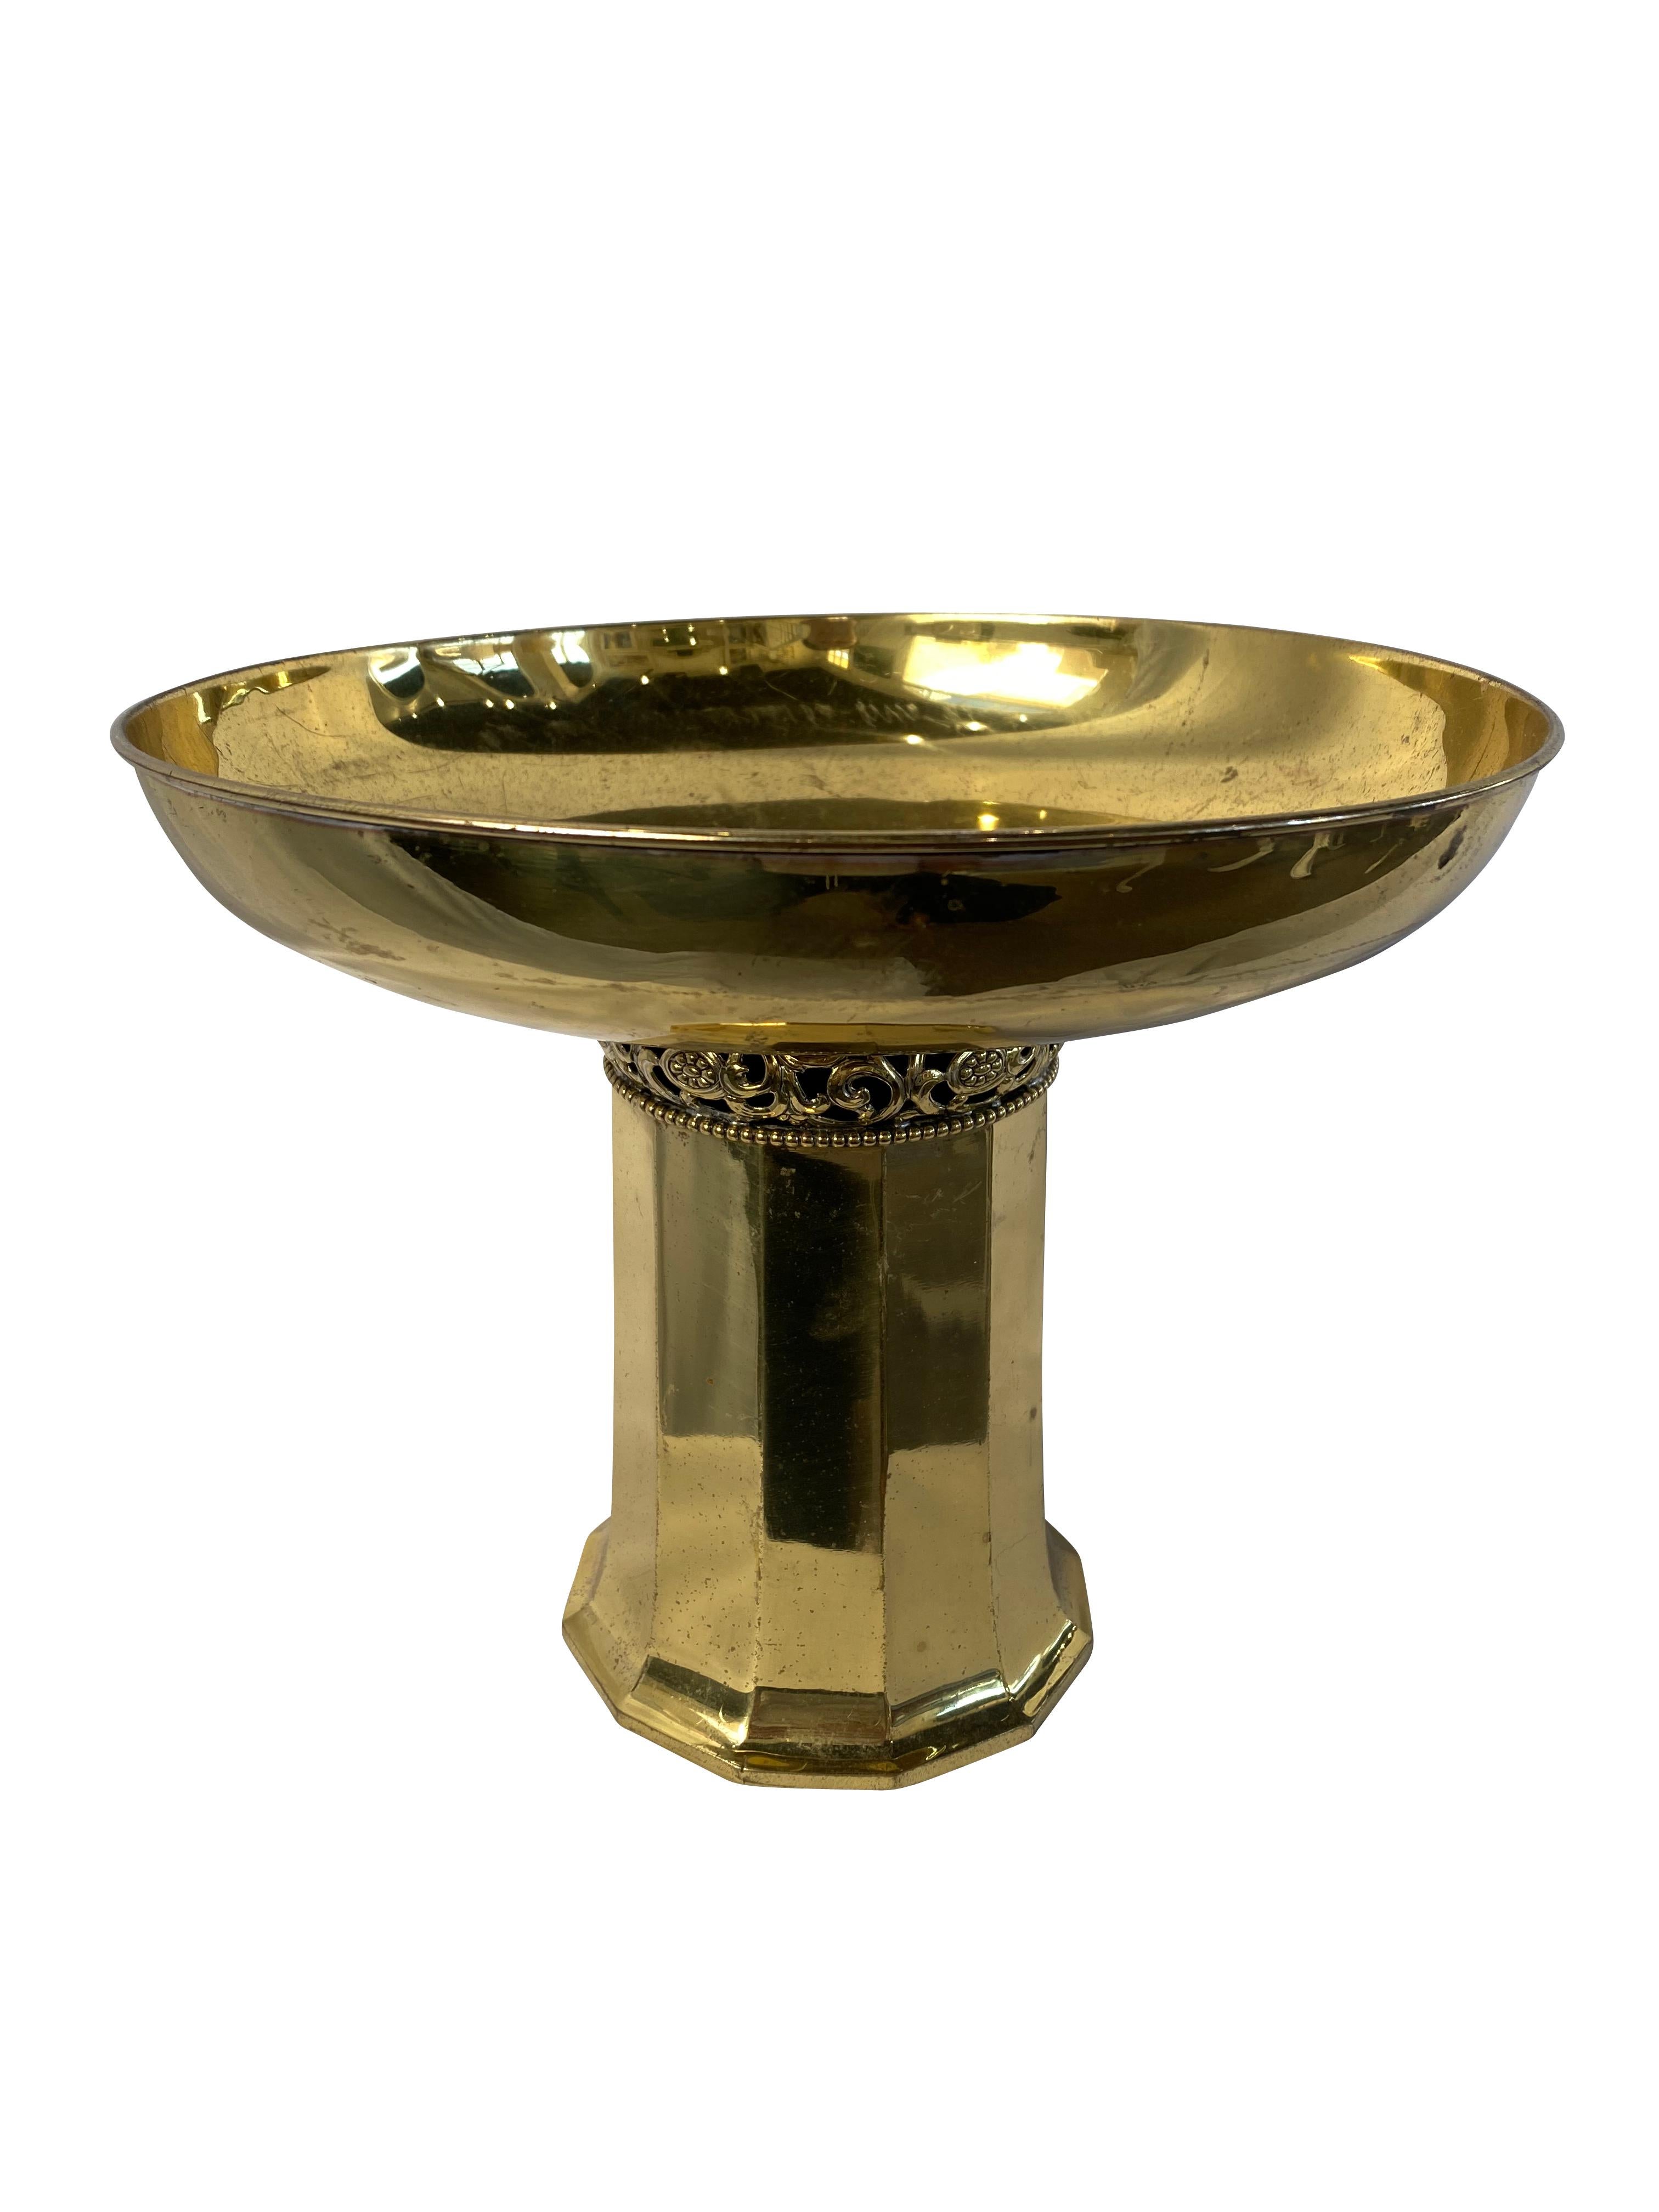 20th Century Brass Art Deco Footed Bowl For Sale